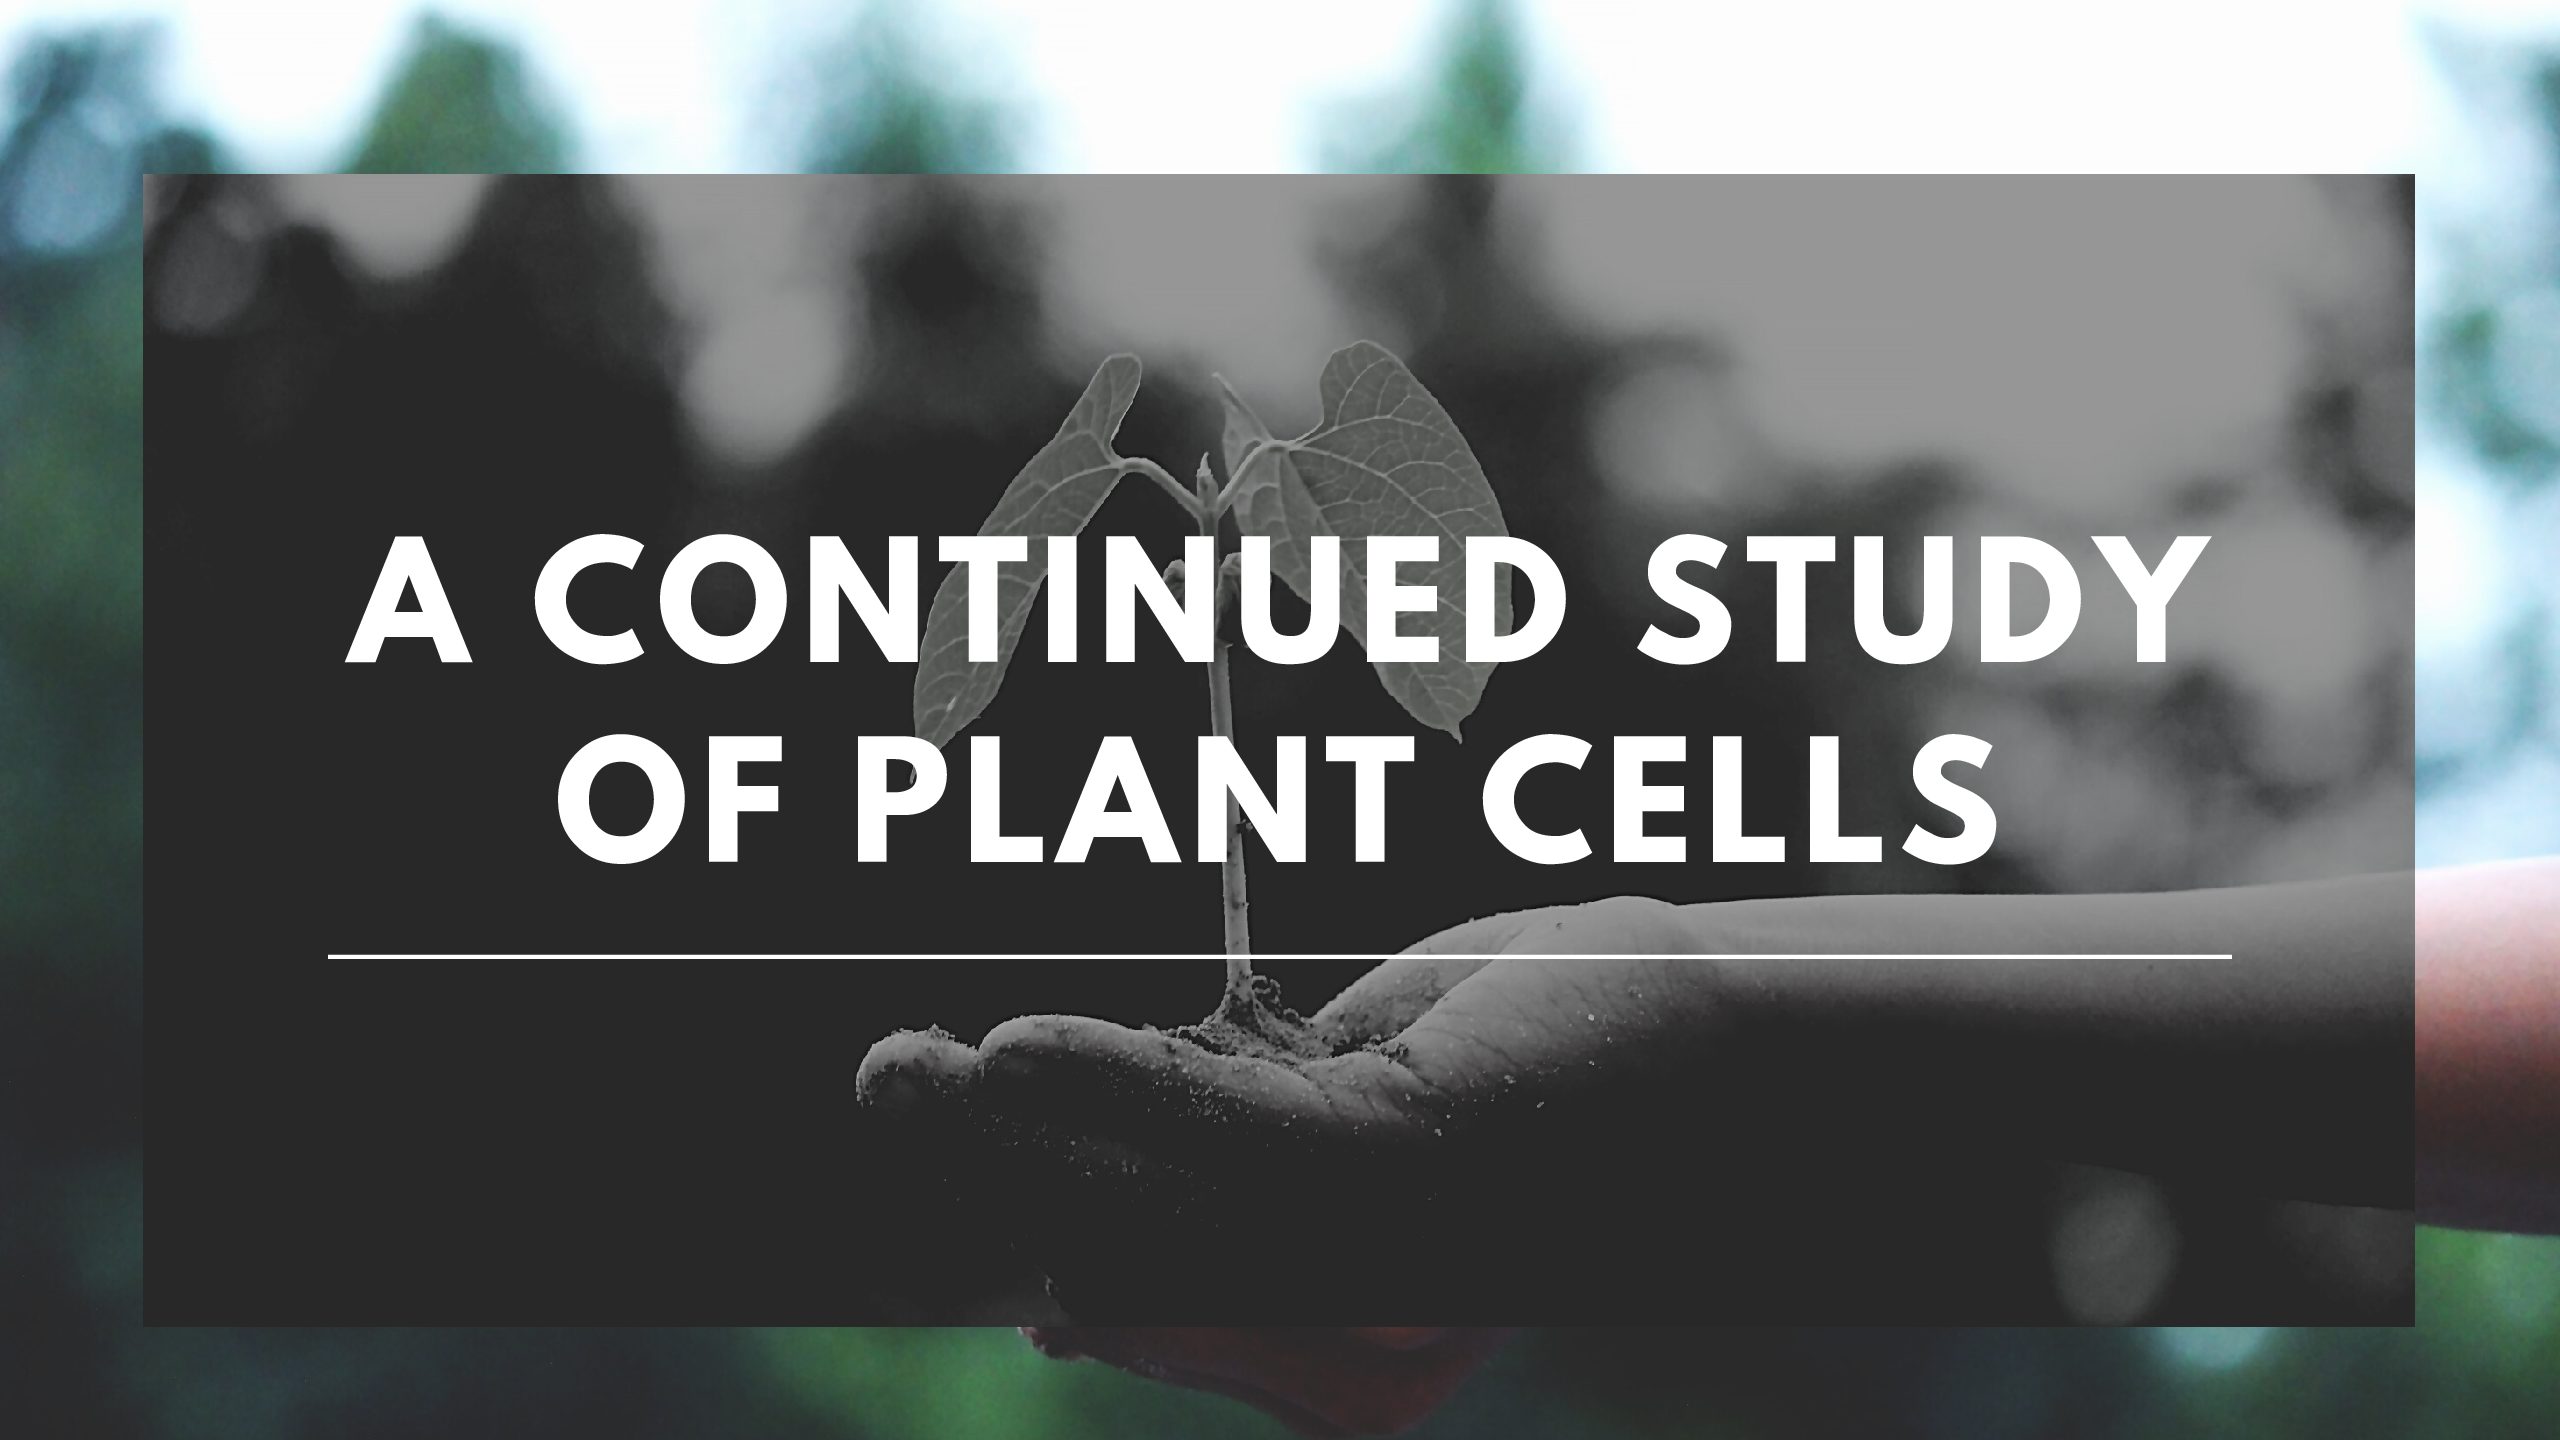 A Continued Study of Plant Cells